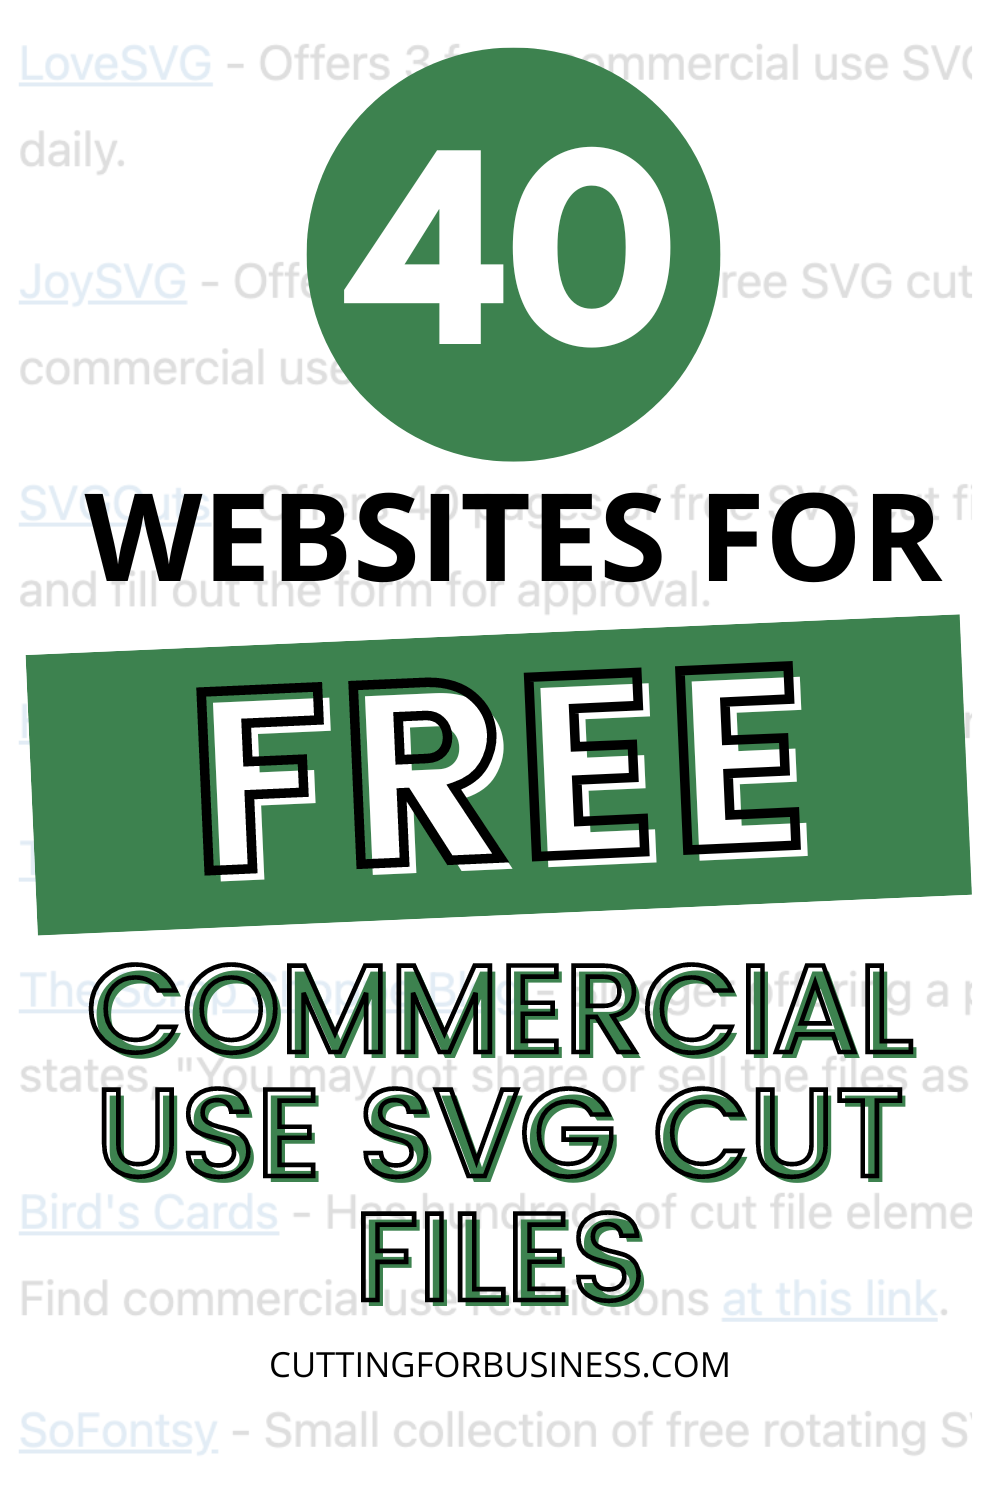 The Huge List of Websites to Download Free SVG Cut Files with Commercial Use for Crafters - Silhouette, Cricut, Glowforge, xTool, and more - cuttingforbusiness.com.